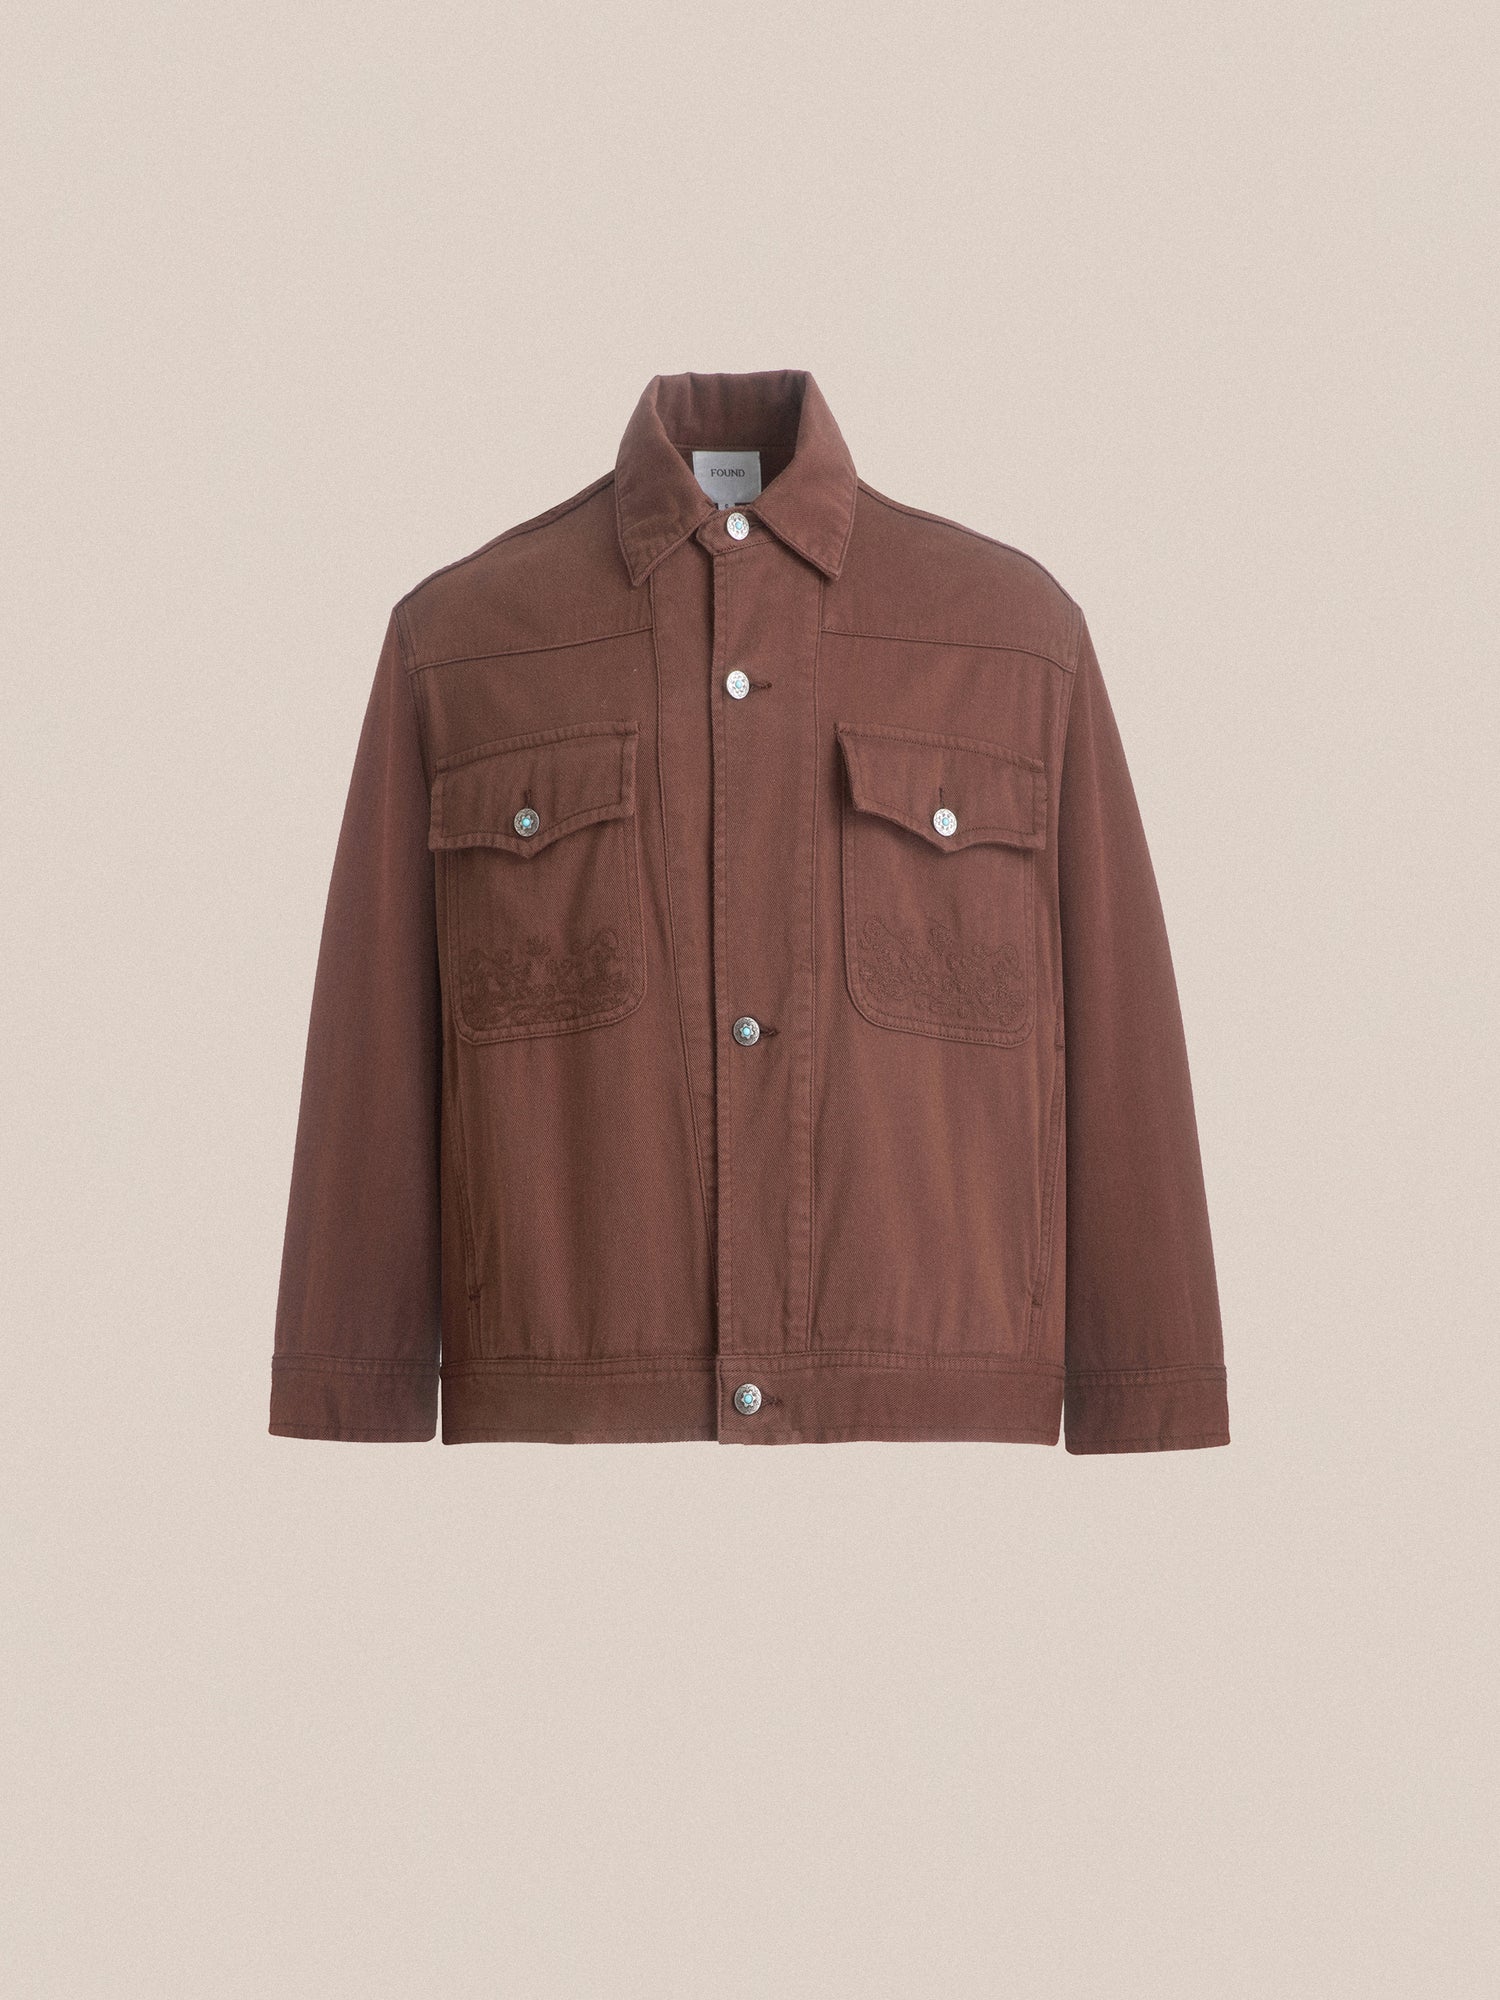 A brown Dusky Western Trucker Jacket with antique blue stone buttons on the front by Found.